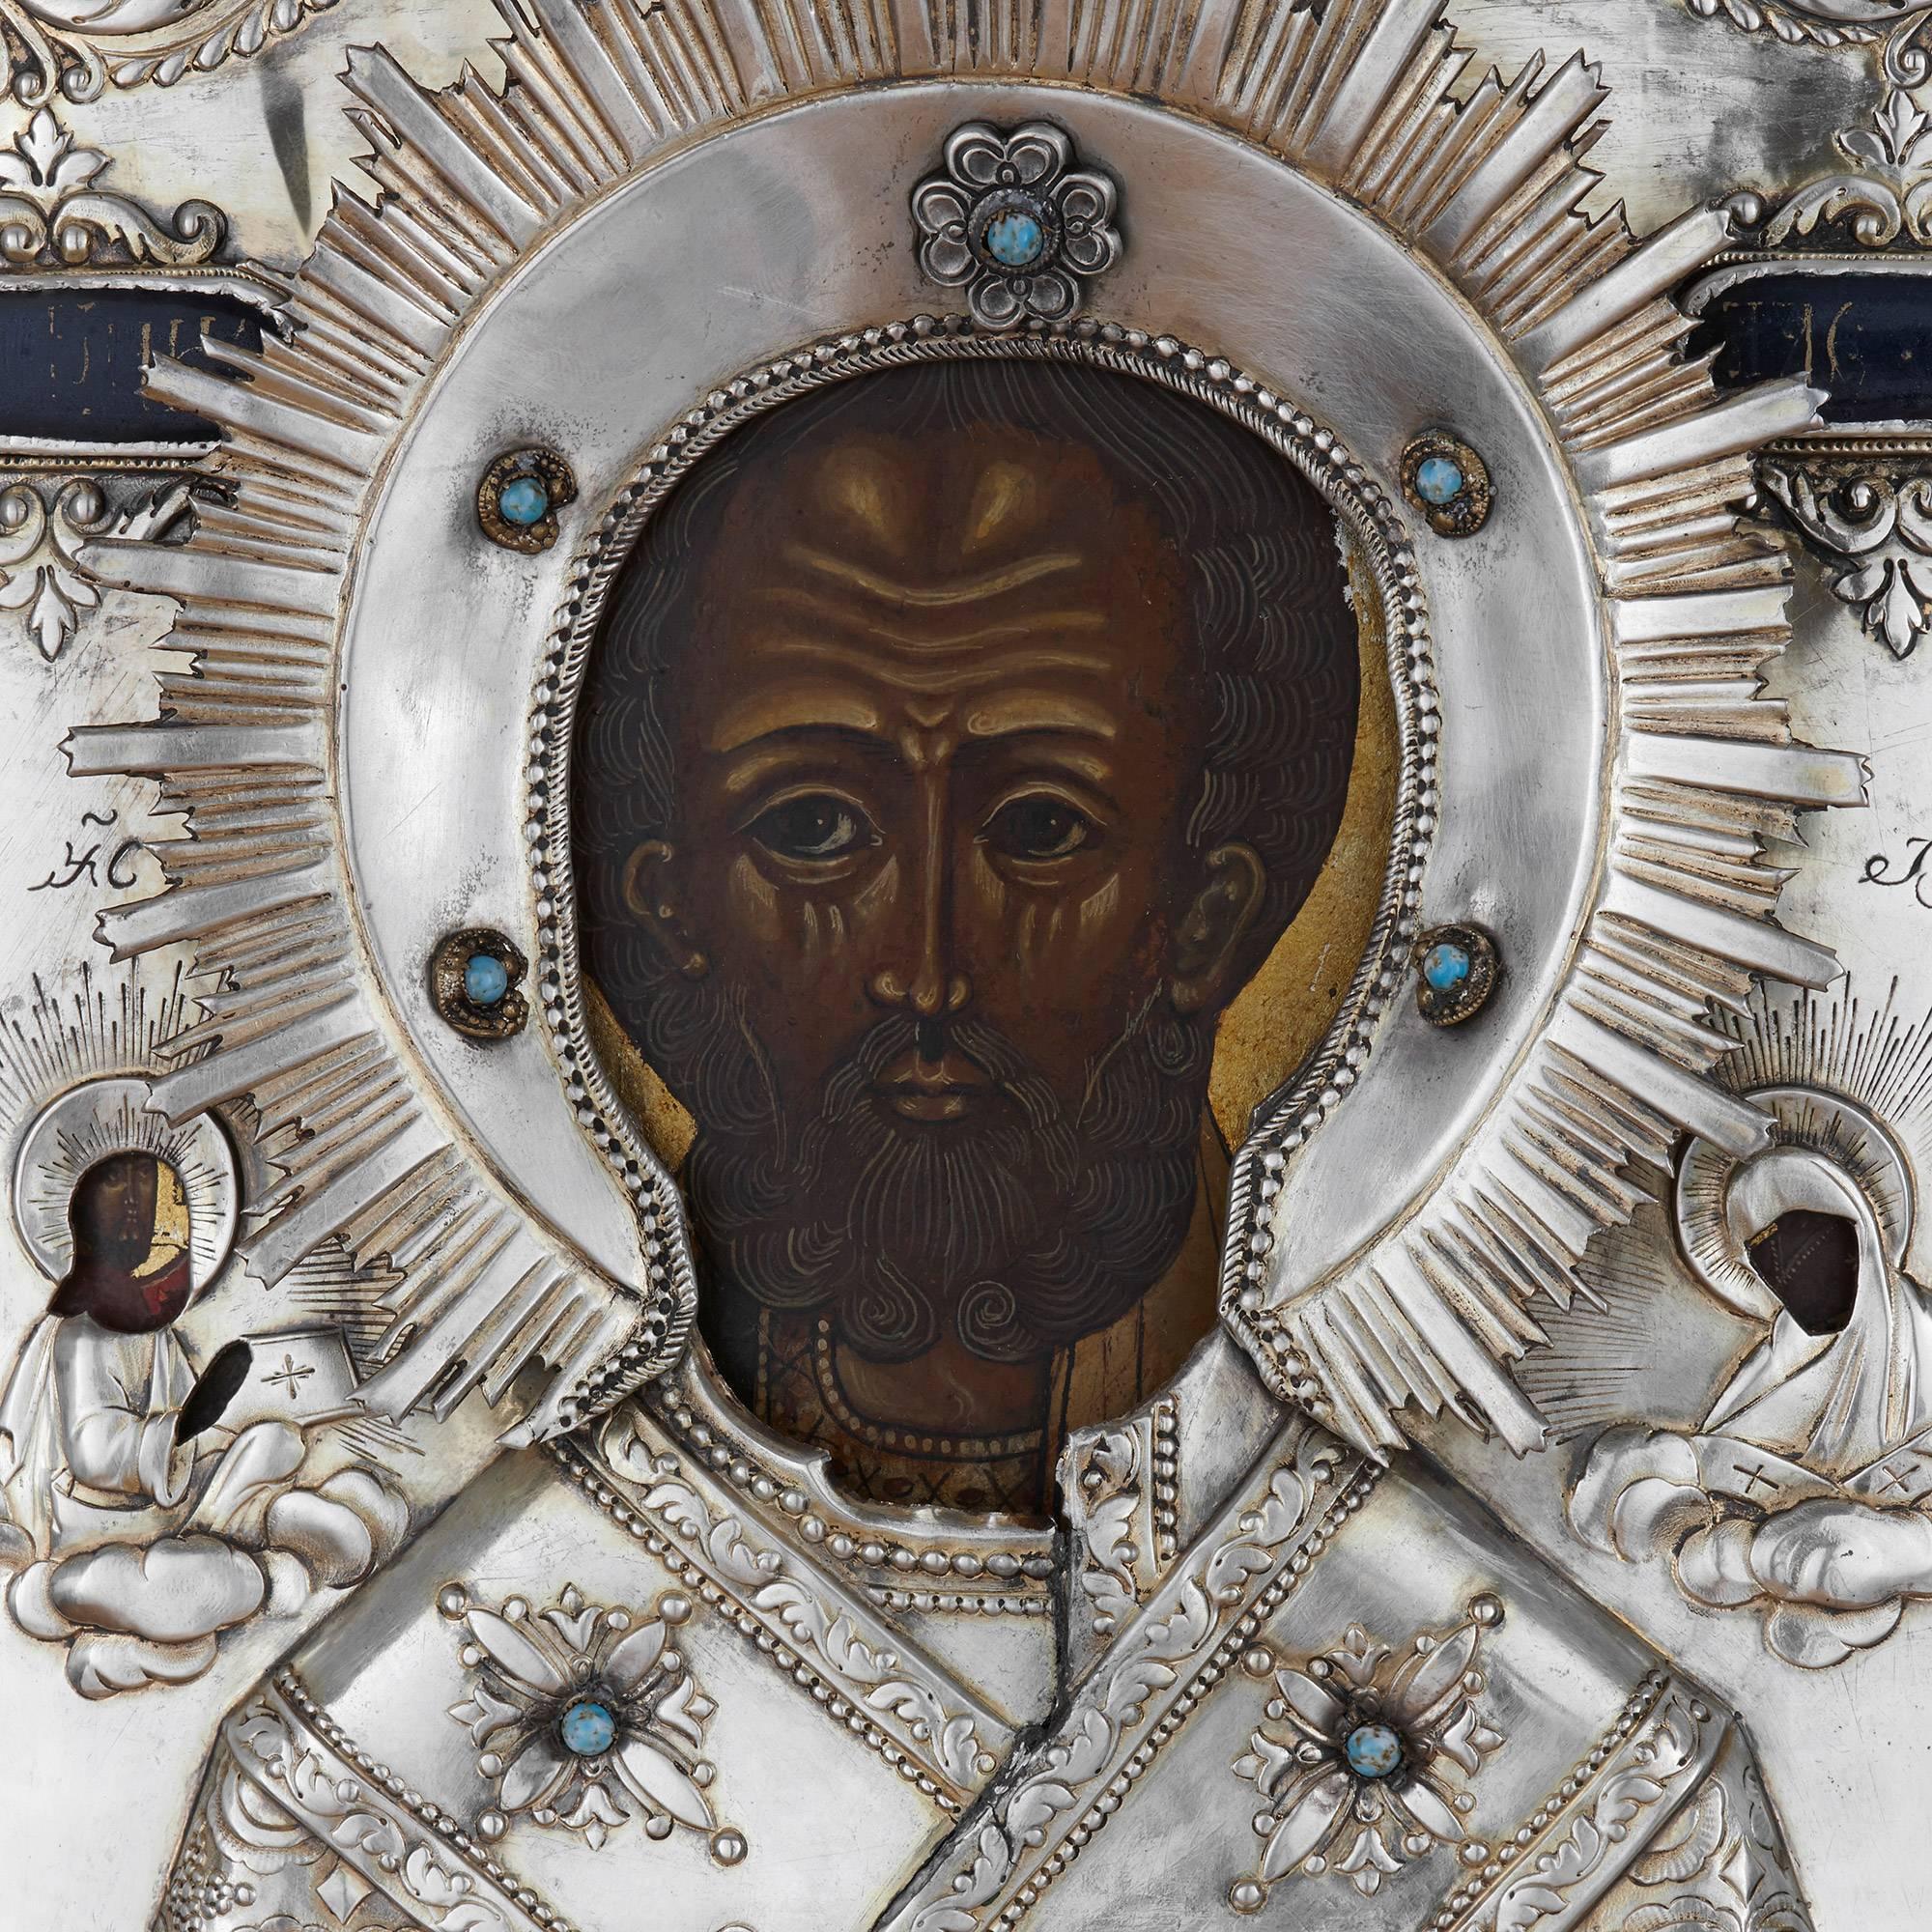 Depicting St. Nicholas at the centre, his right hand raised making the sign of the cross, his left hand holding a Bible; the icon covered by a protective silver oklad.

This stunning antique icon, although crafted in the typical Russian Orthodox